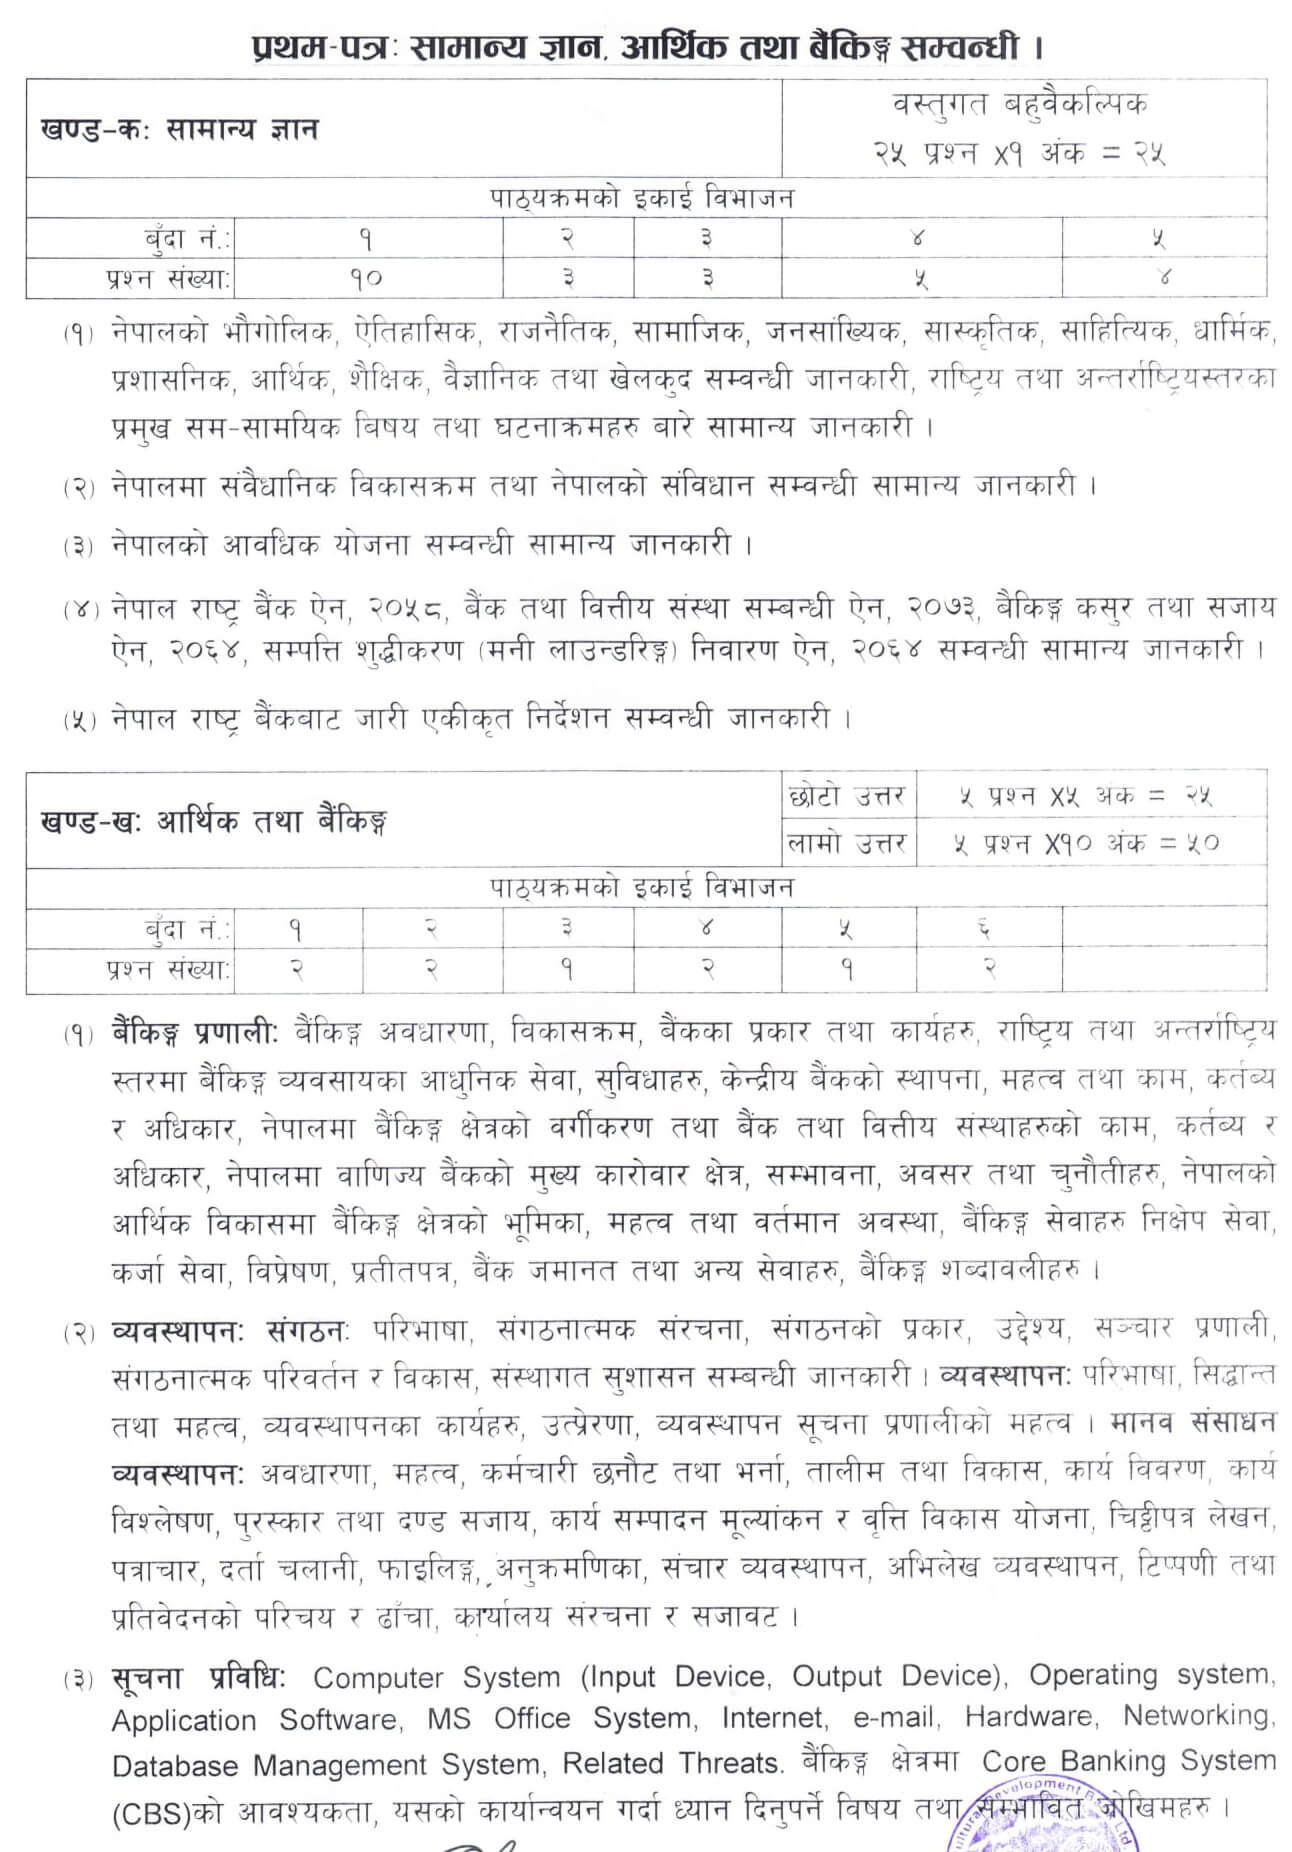 Syllabus of Agricultural Development Bank Level 5 Loan Assistant